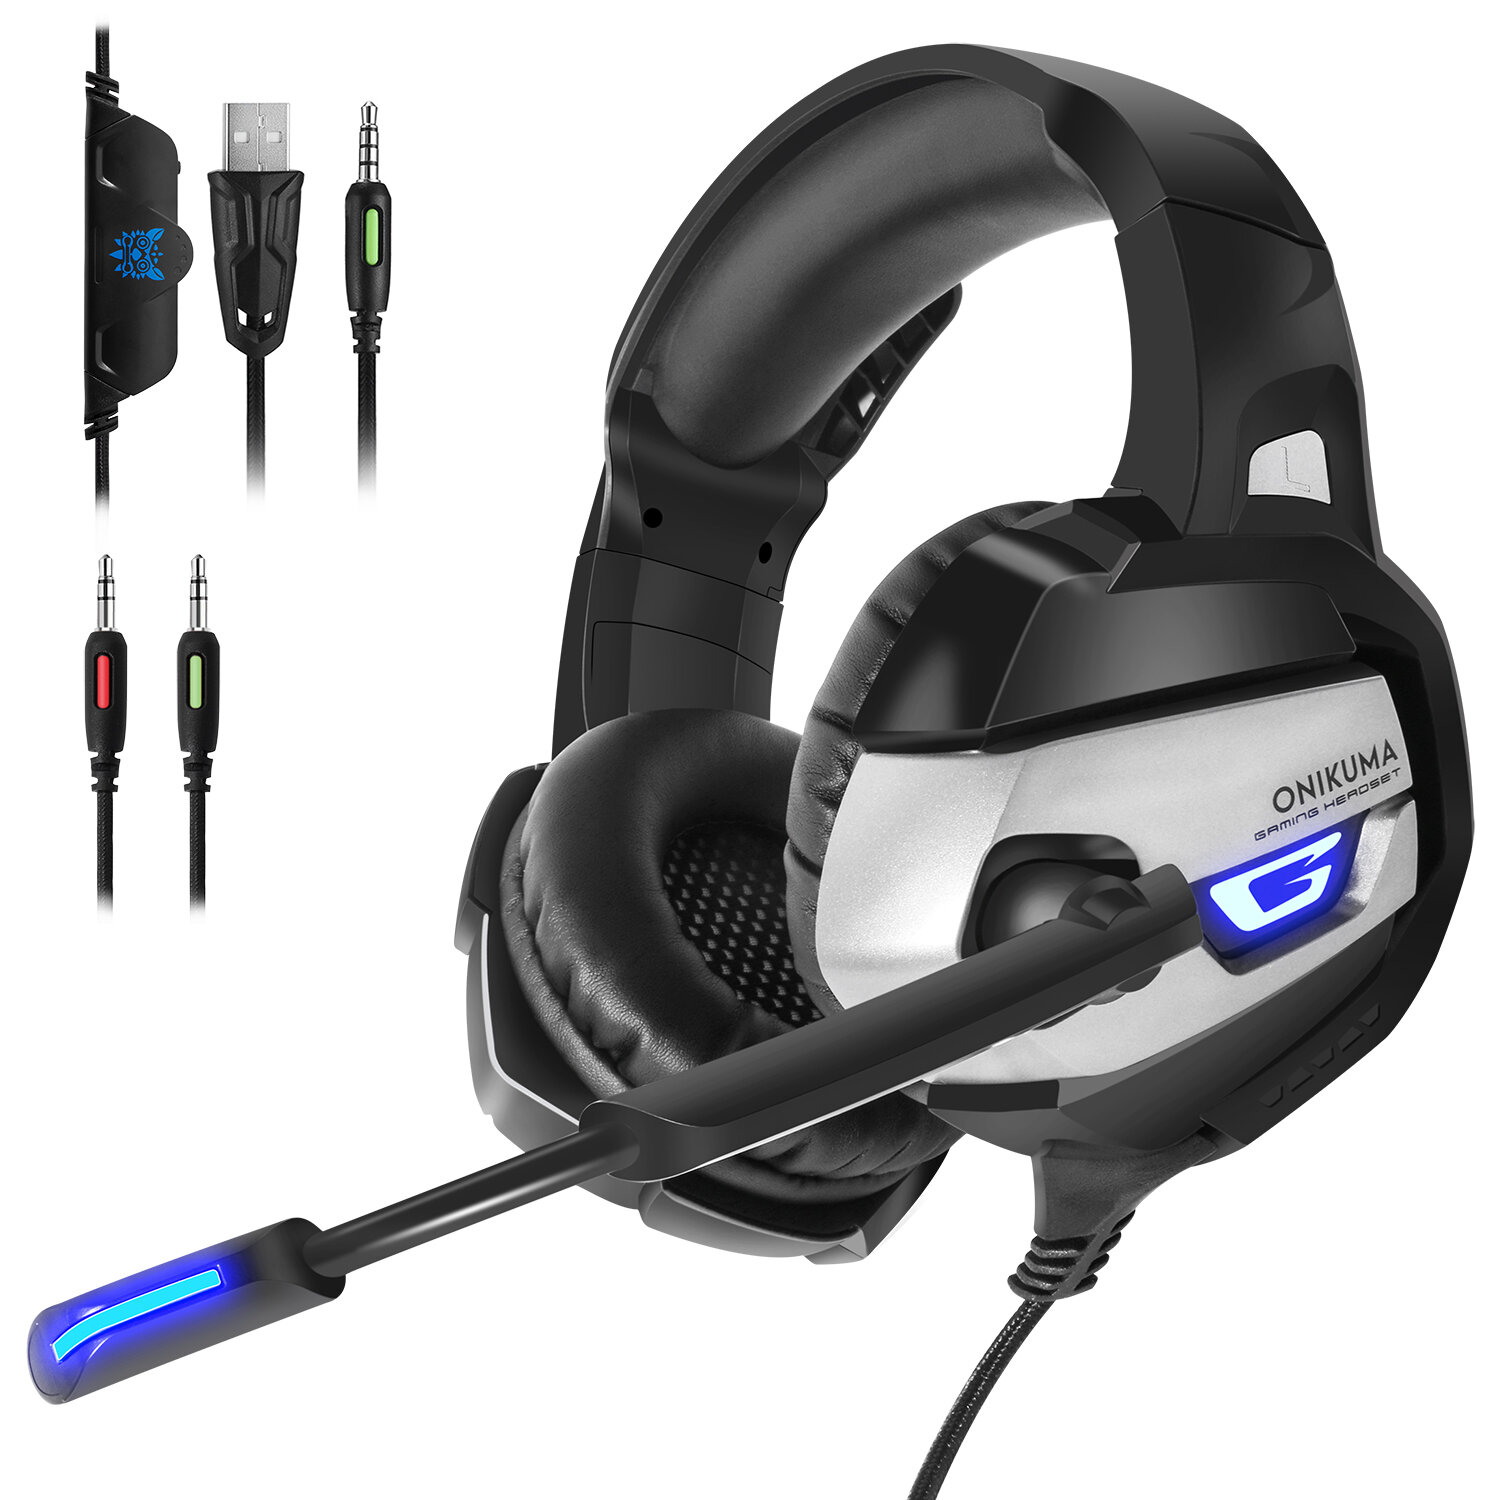 

ONIKUMA K5 Gaming Headset Game Headphone Deep Bass USB 3.5mm Stereo Wired Headphone with Mic for PS4 Xbox PC Phone Lapto